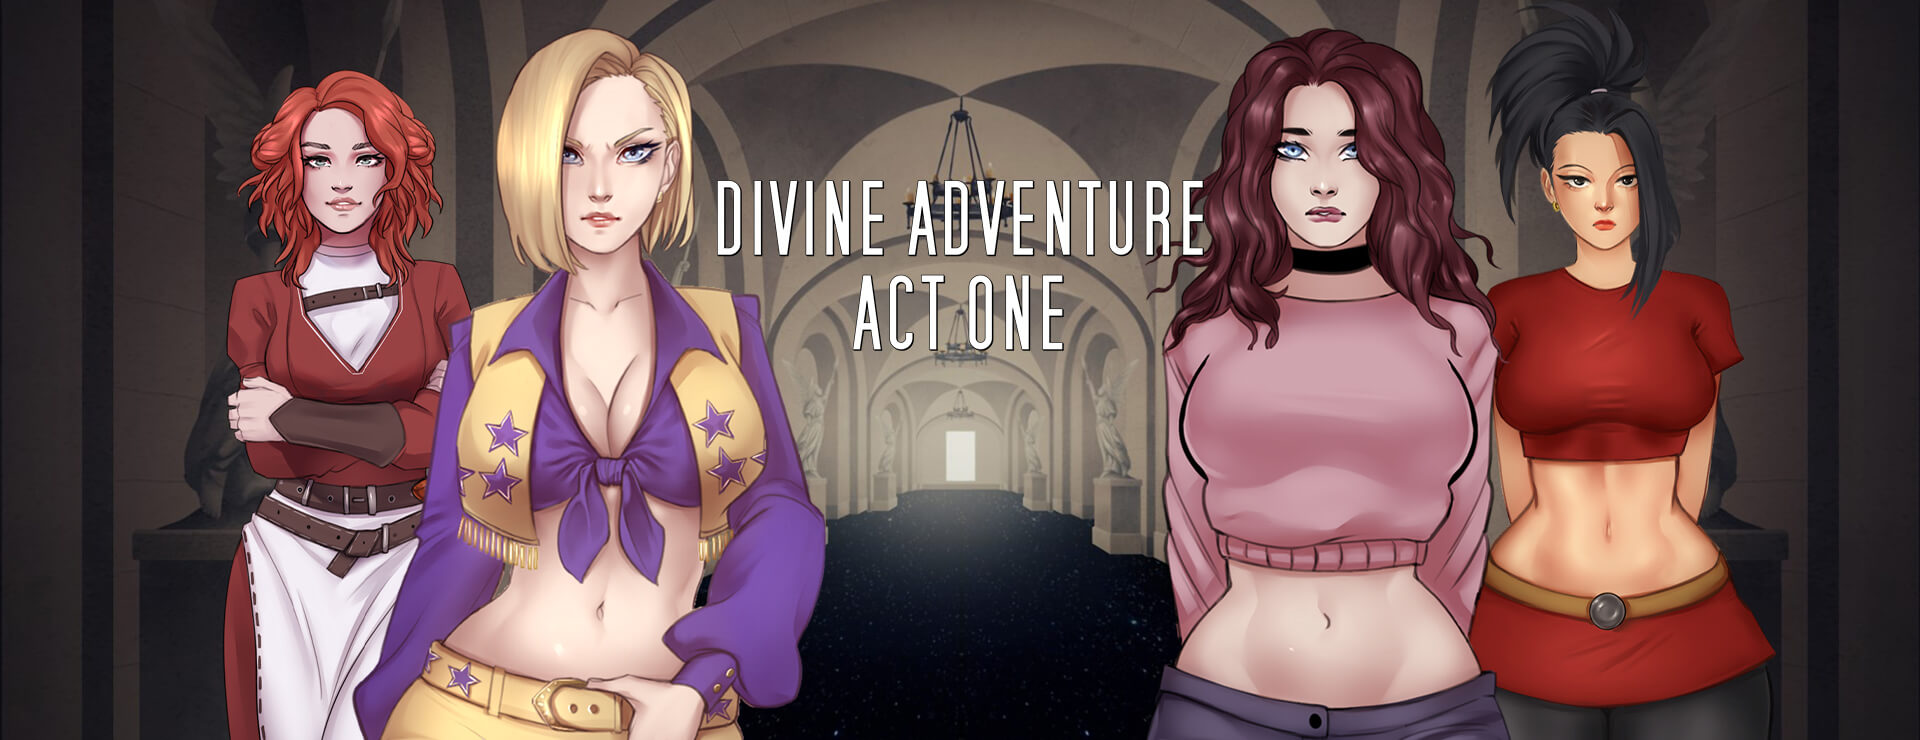 Divine Adventure Act One - RPG Game